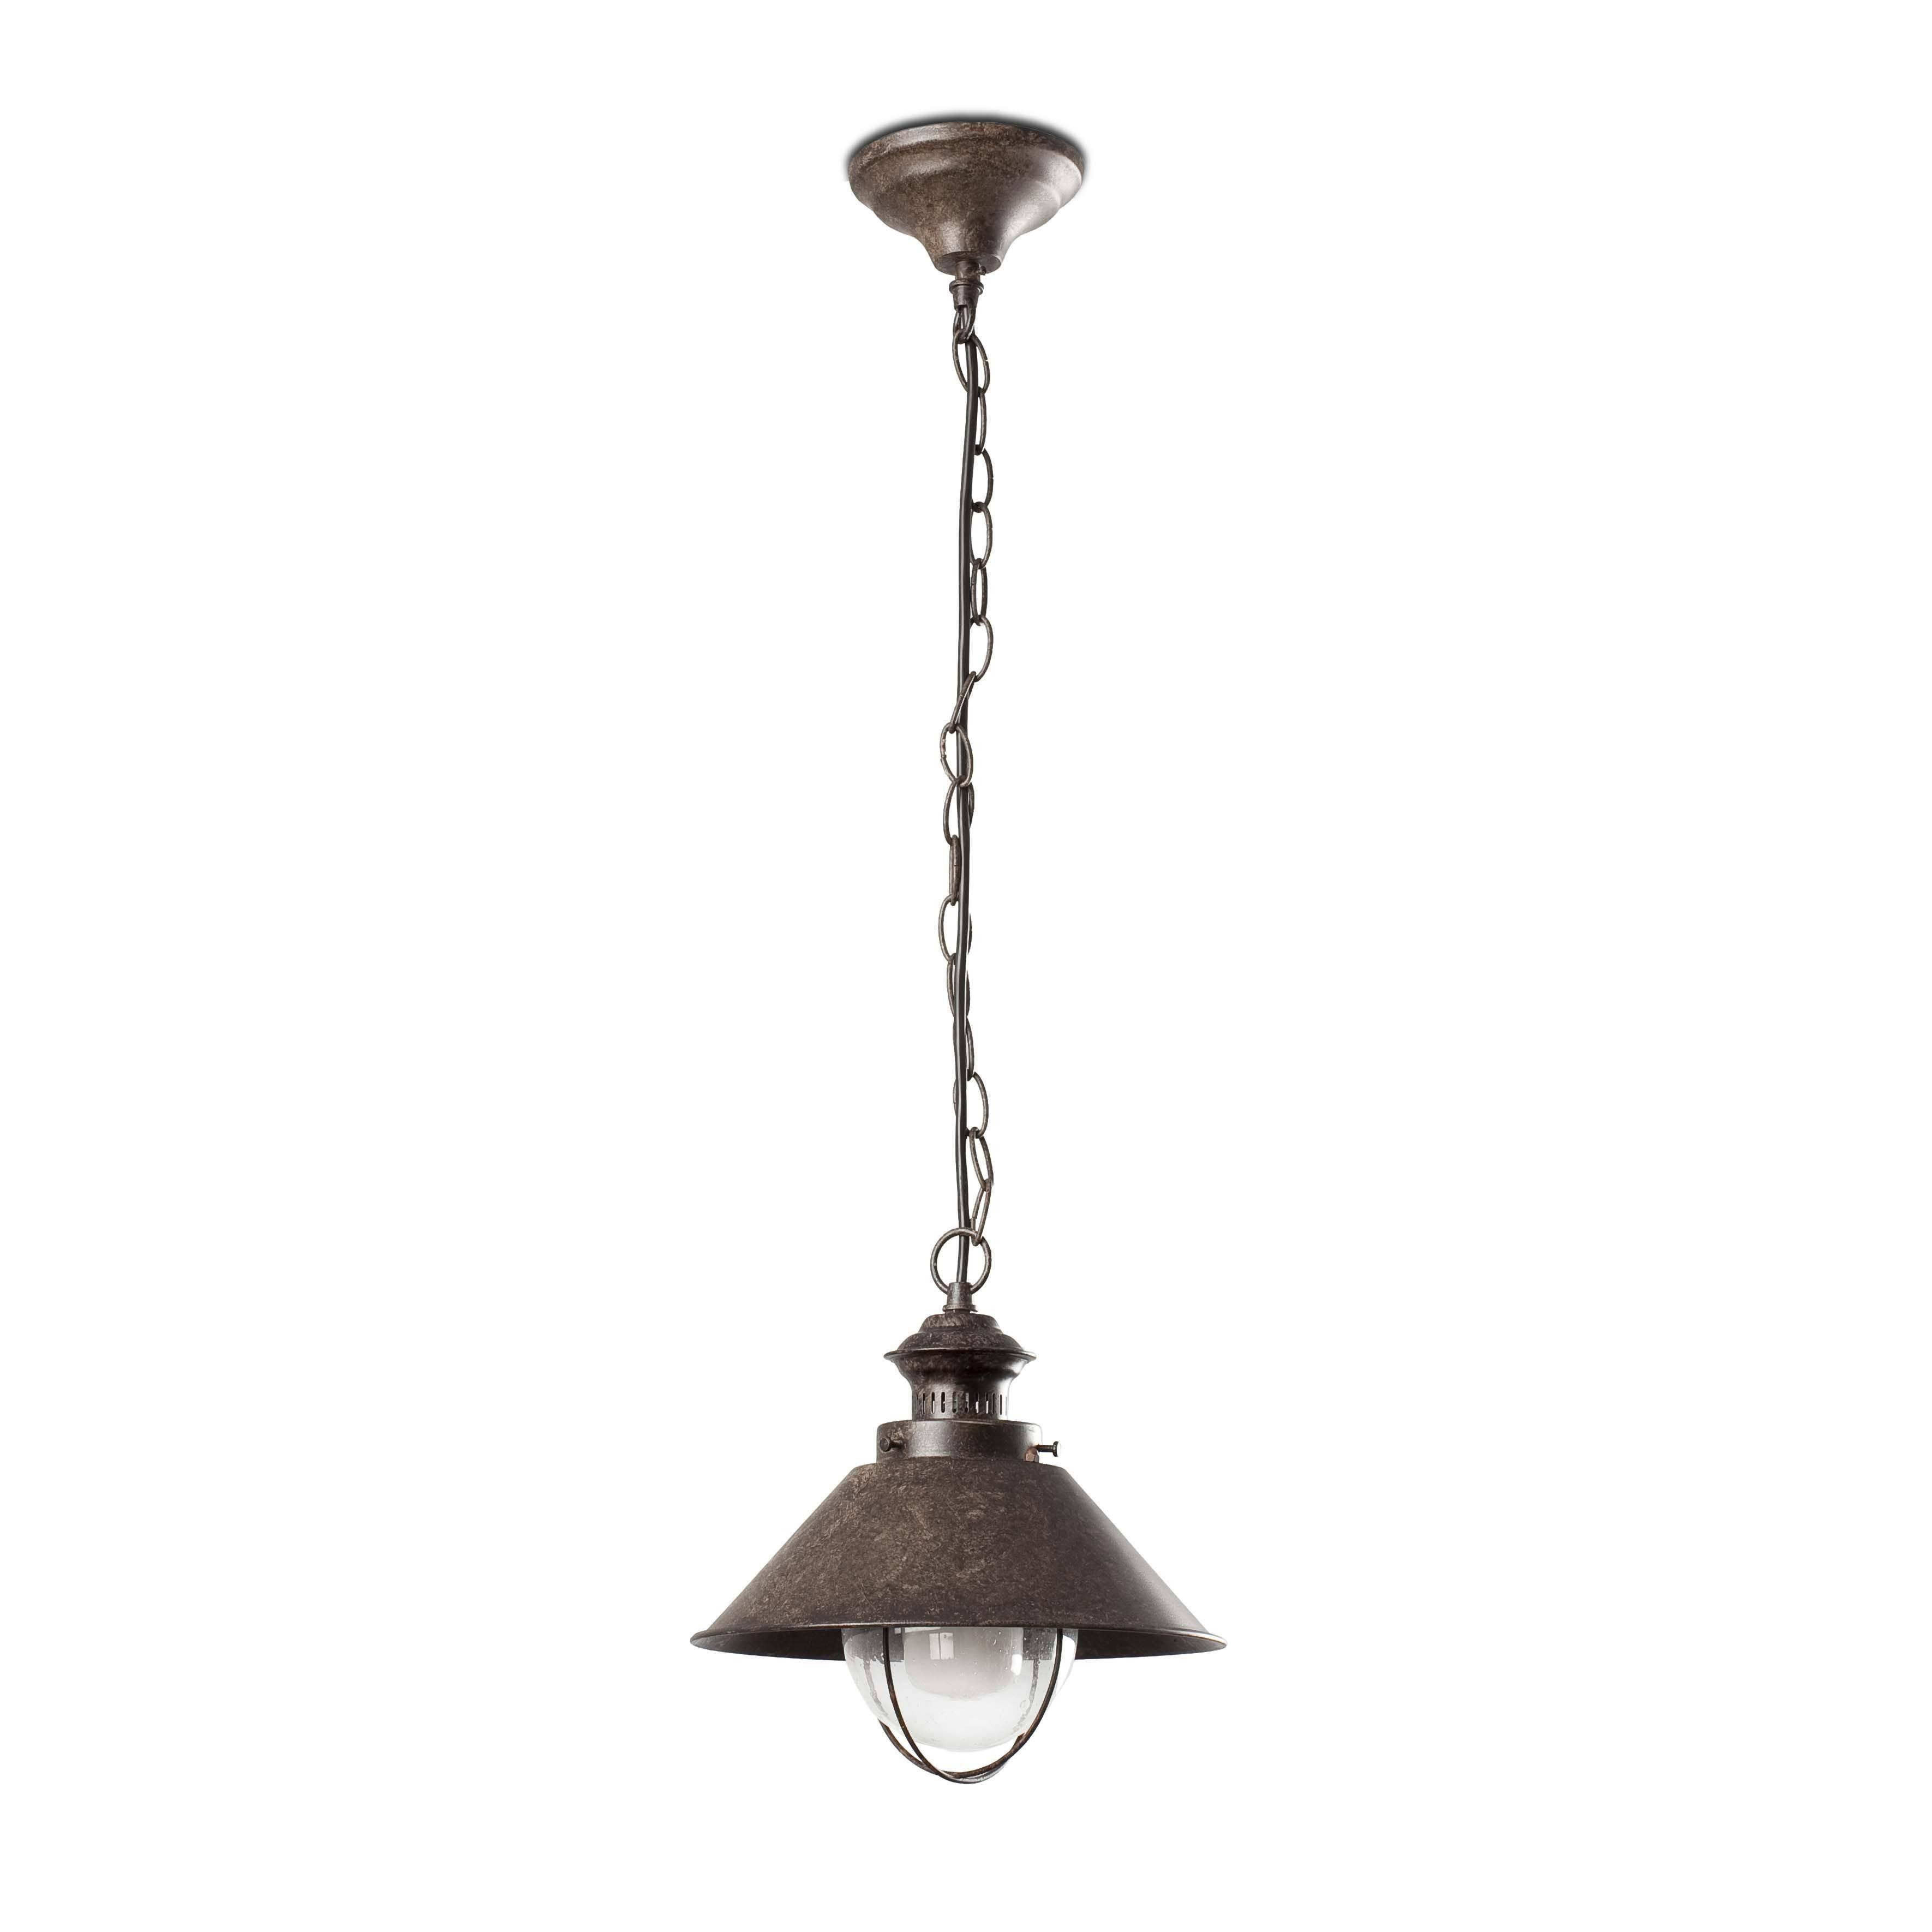 Nautica 1 Light Small Outdoor Ceiling Pendant Light Clear Rust Brown E27